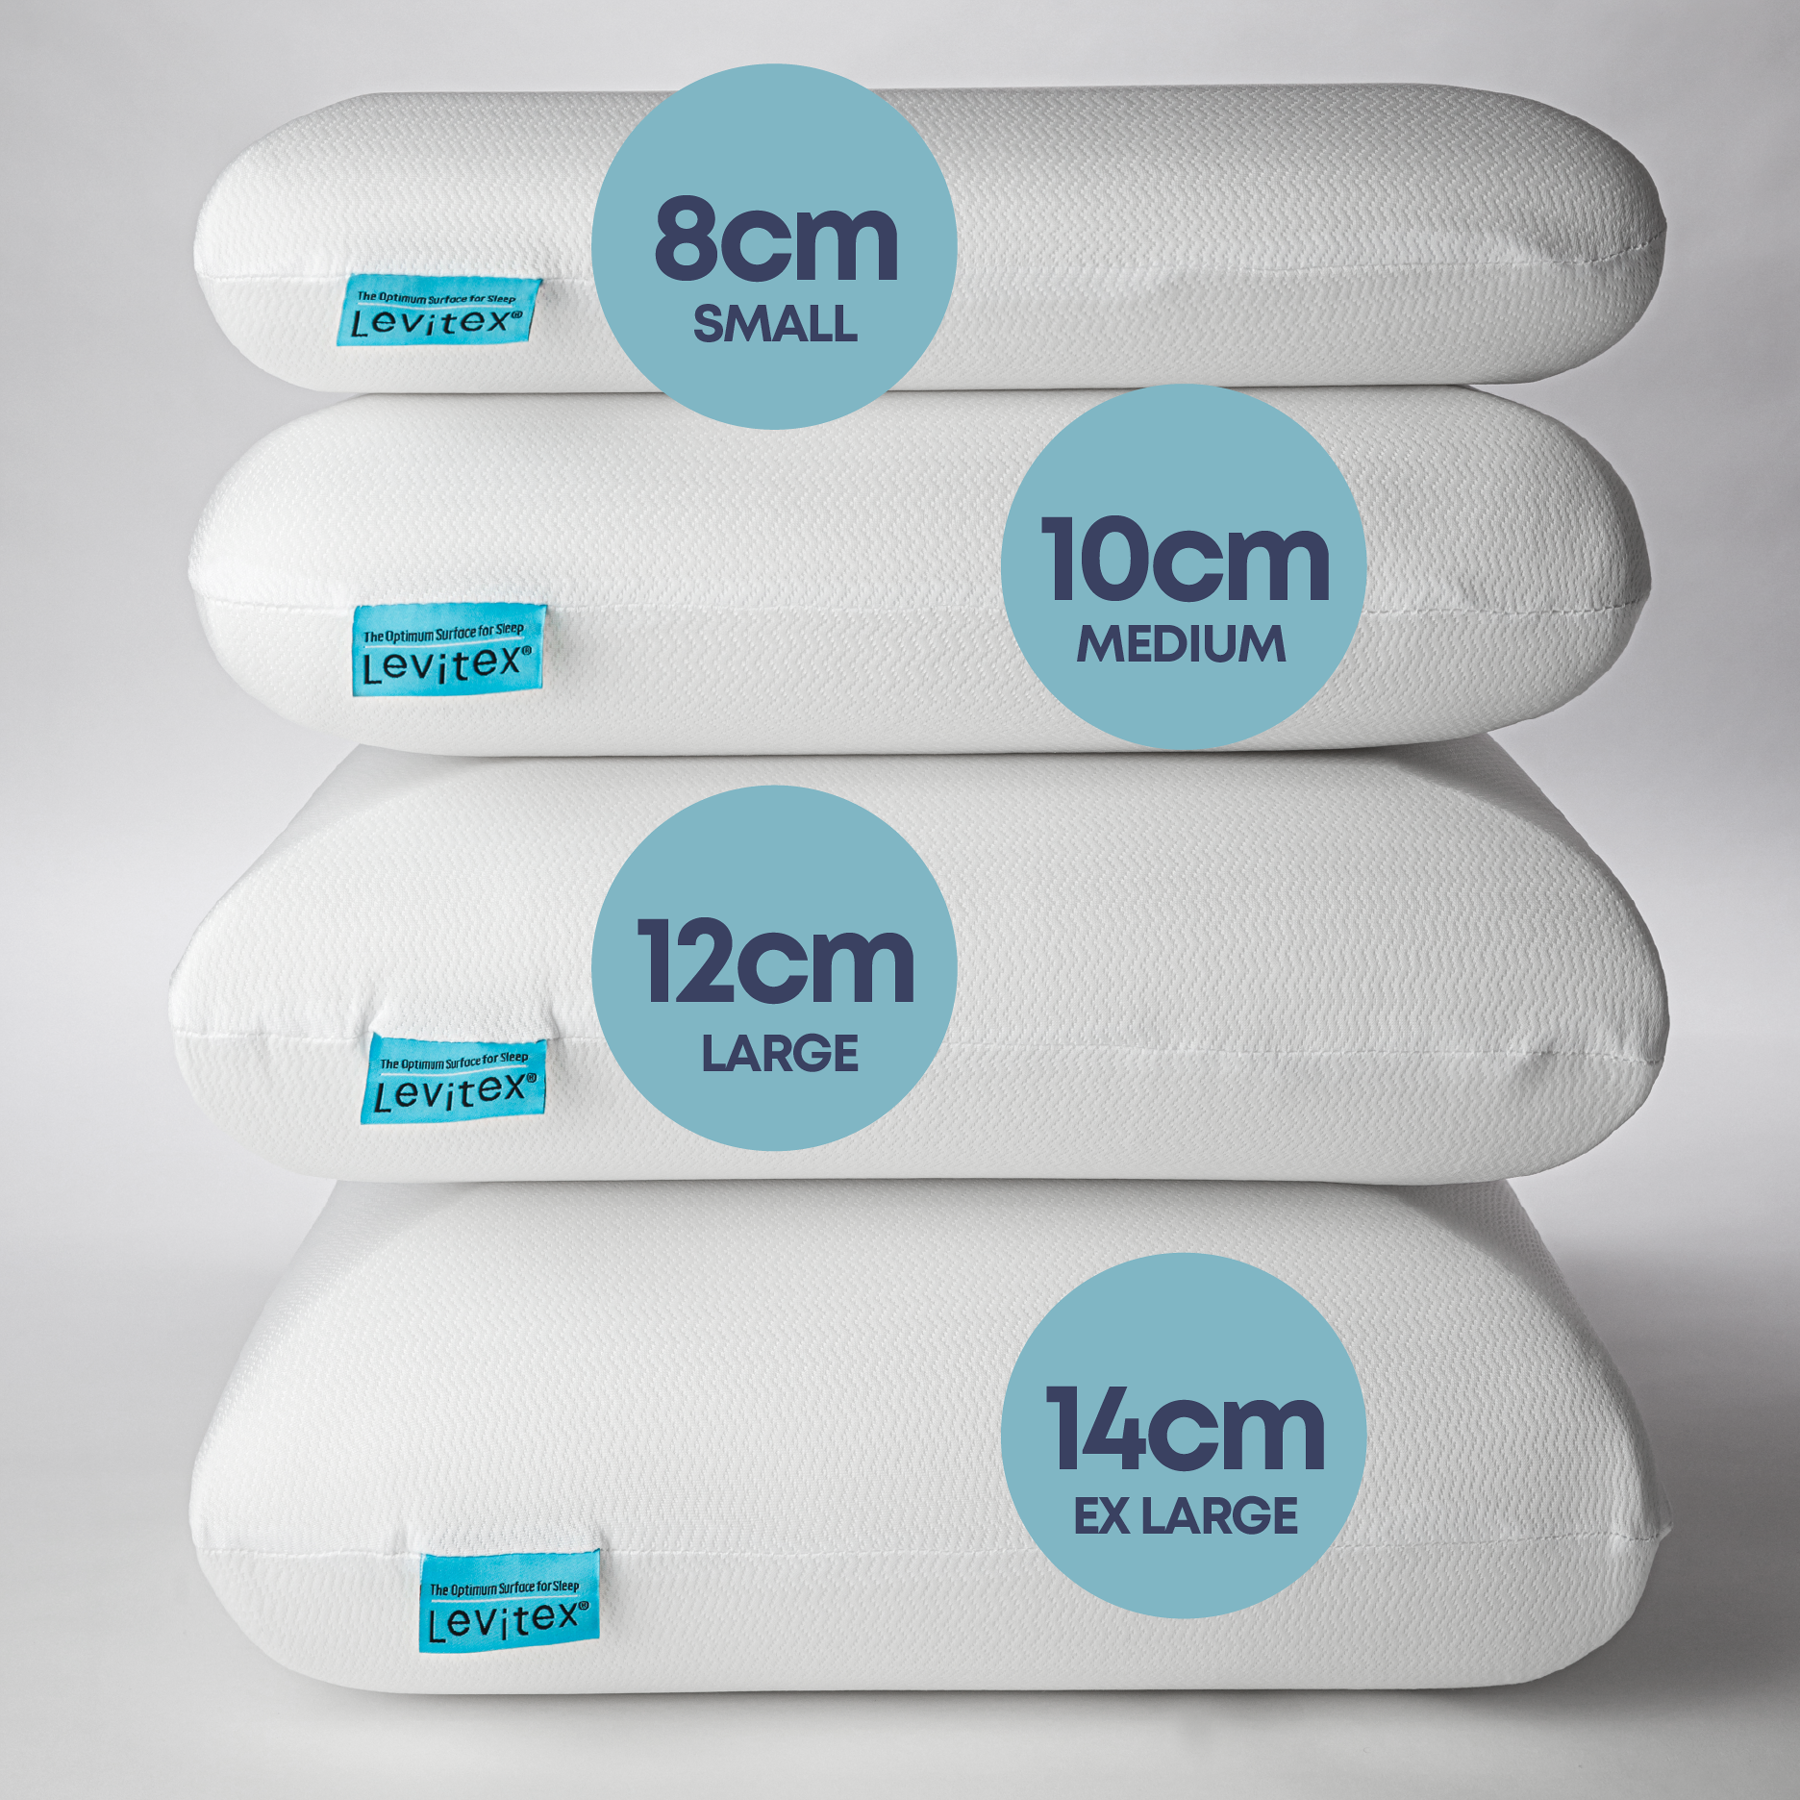 Different sized pillows stacked on one another